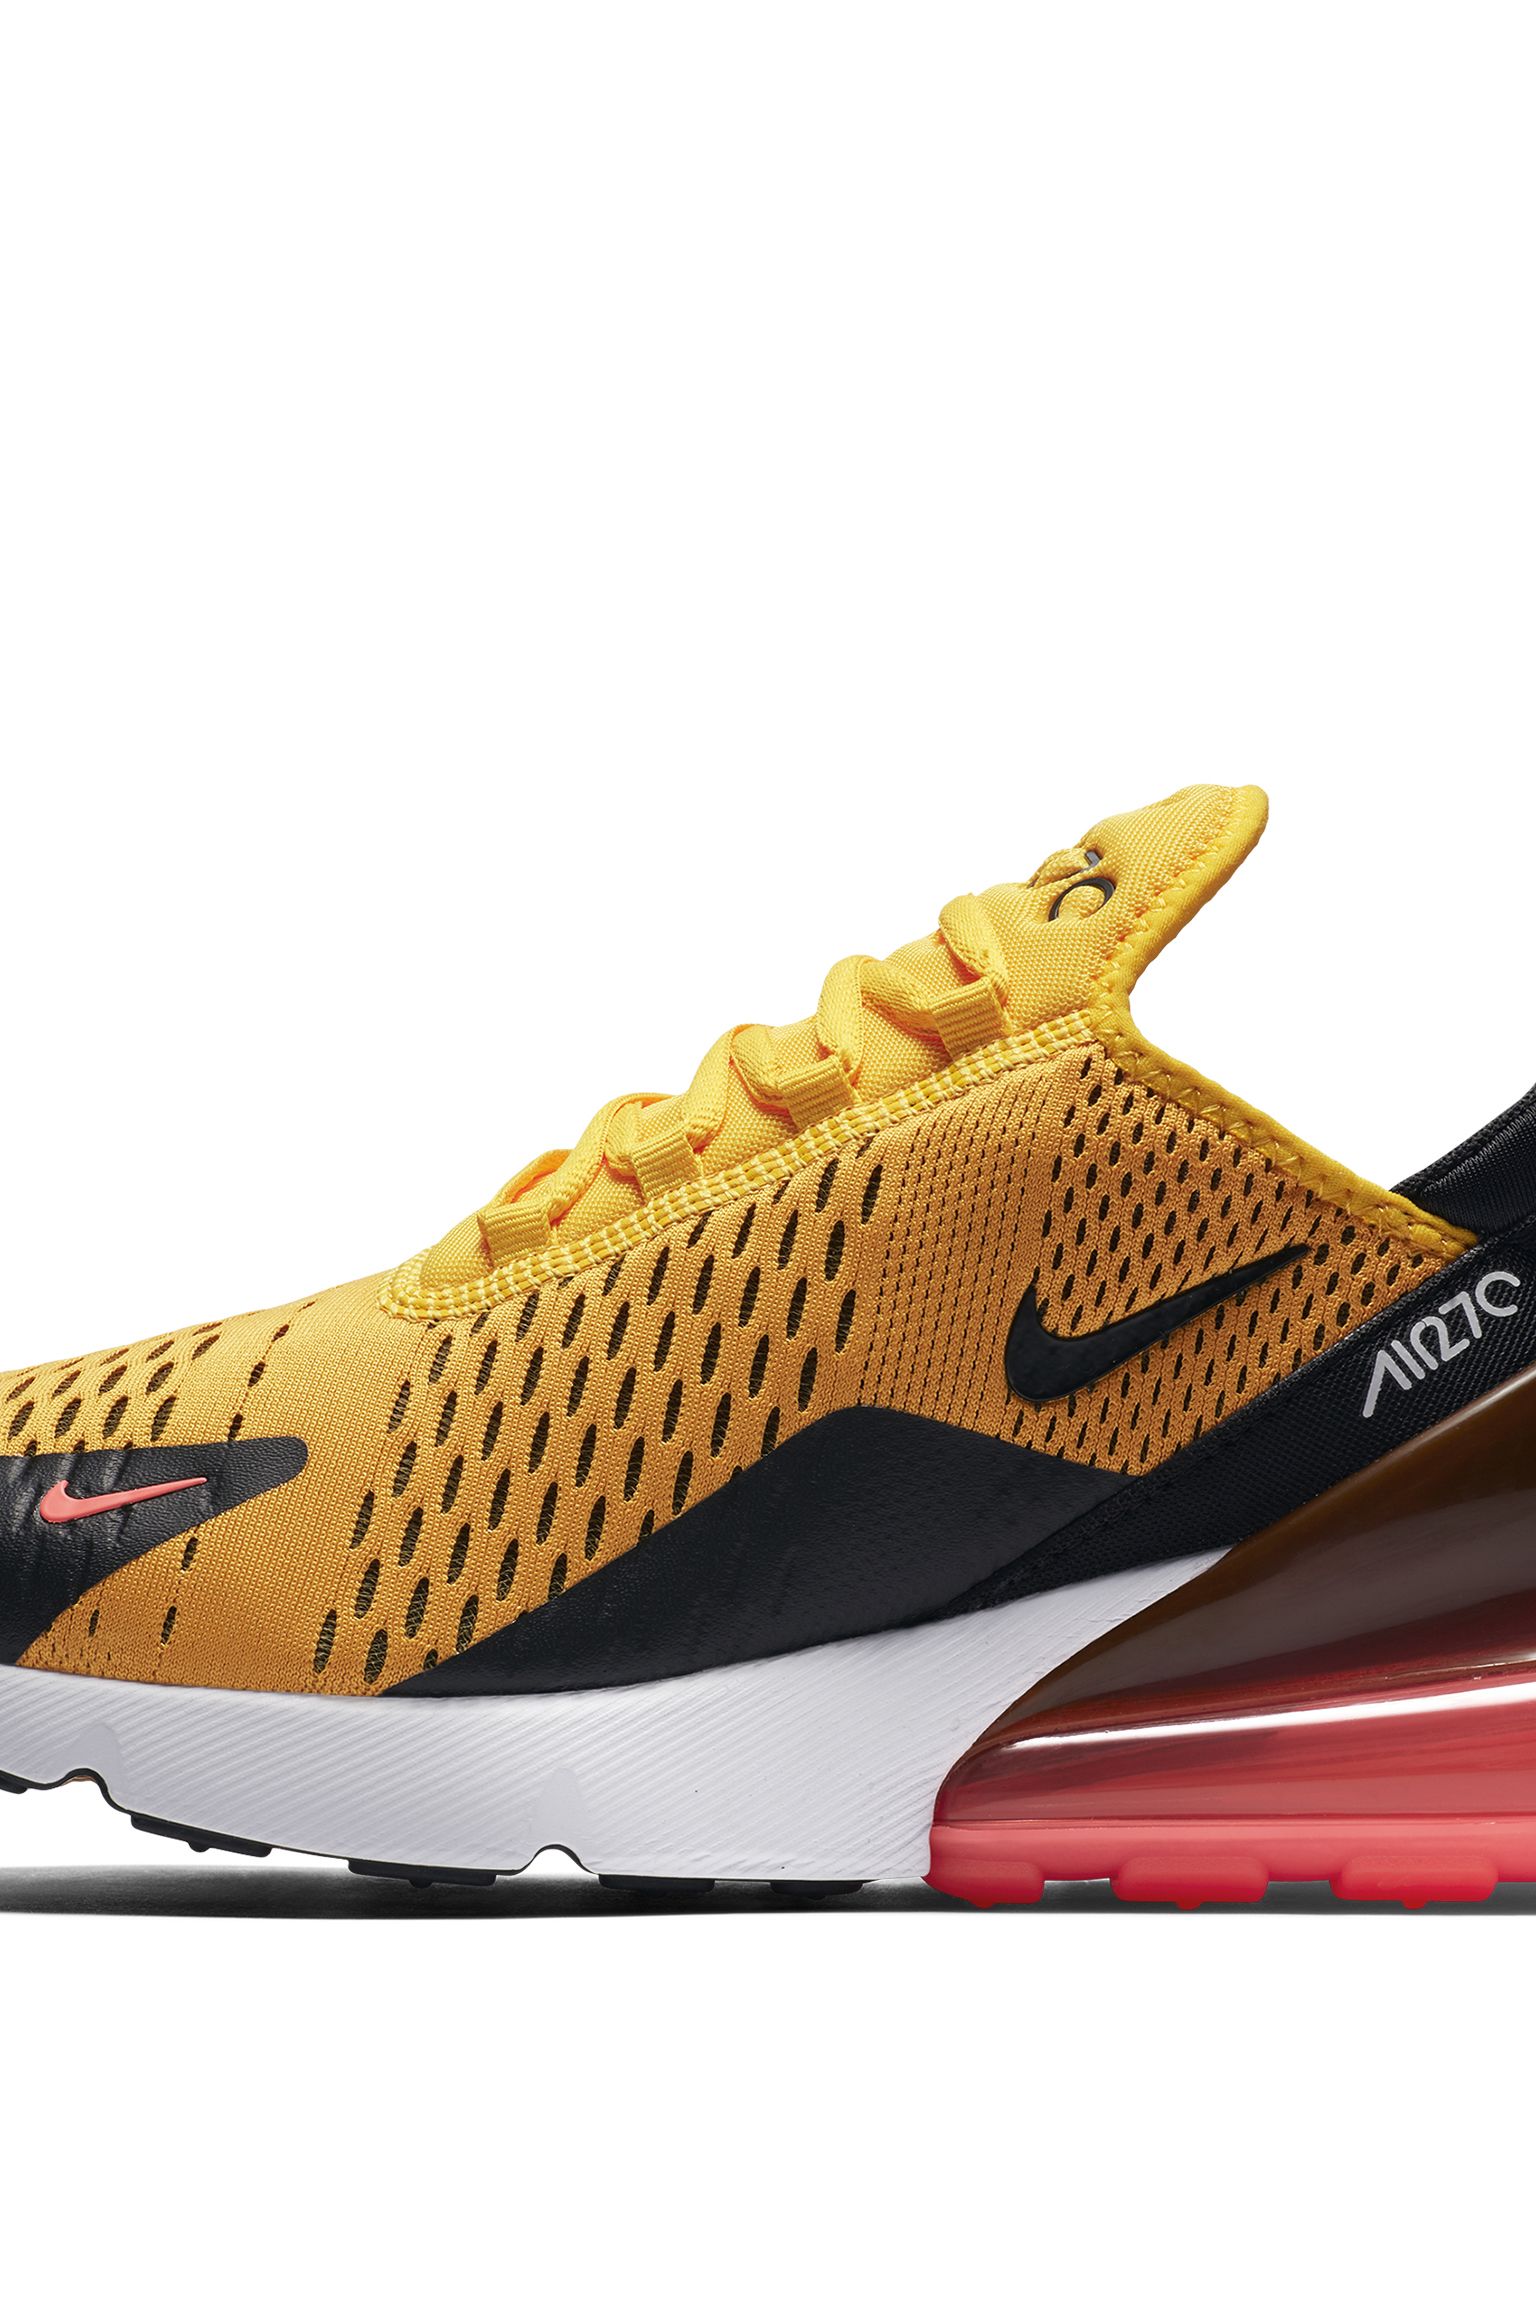 black and gold nike air 270